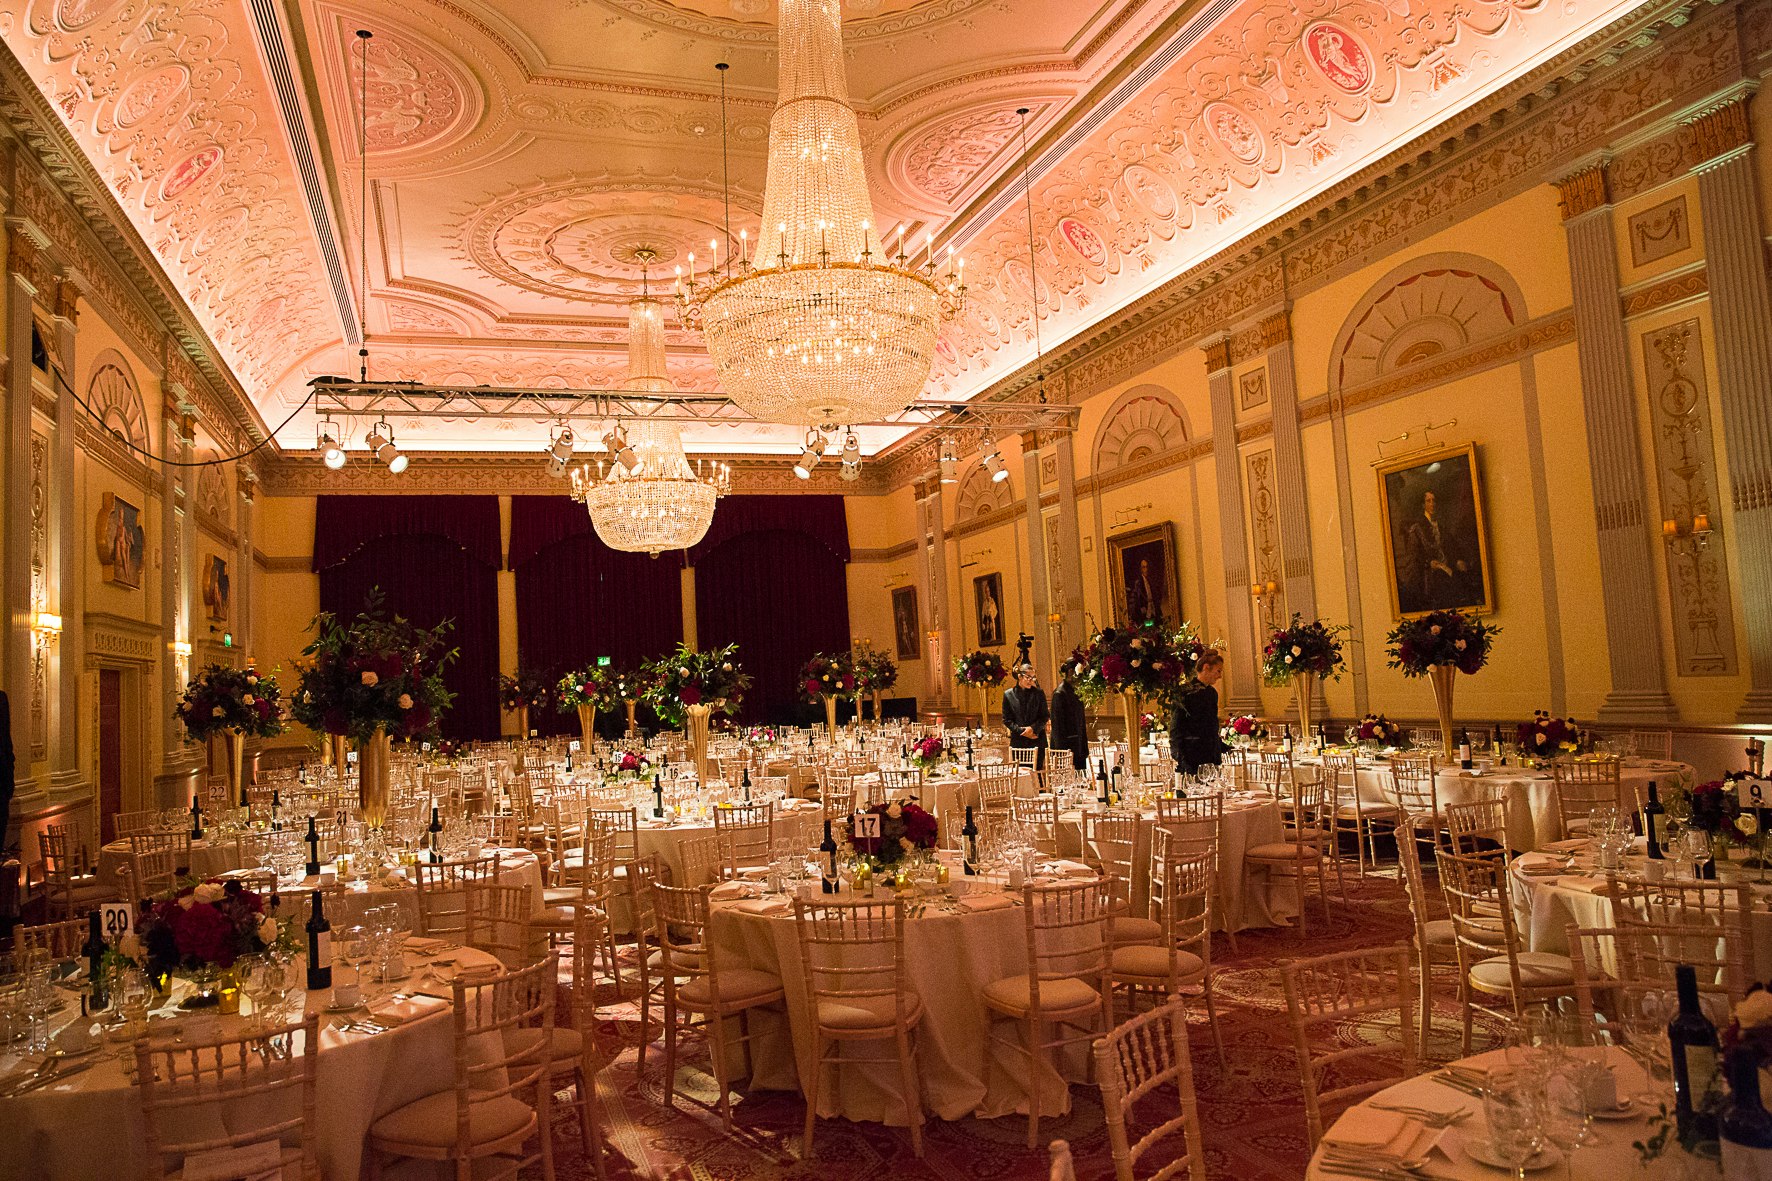 Awards Ceremony Venues in London - Plaisterers’ Hall